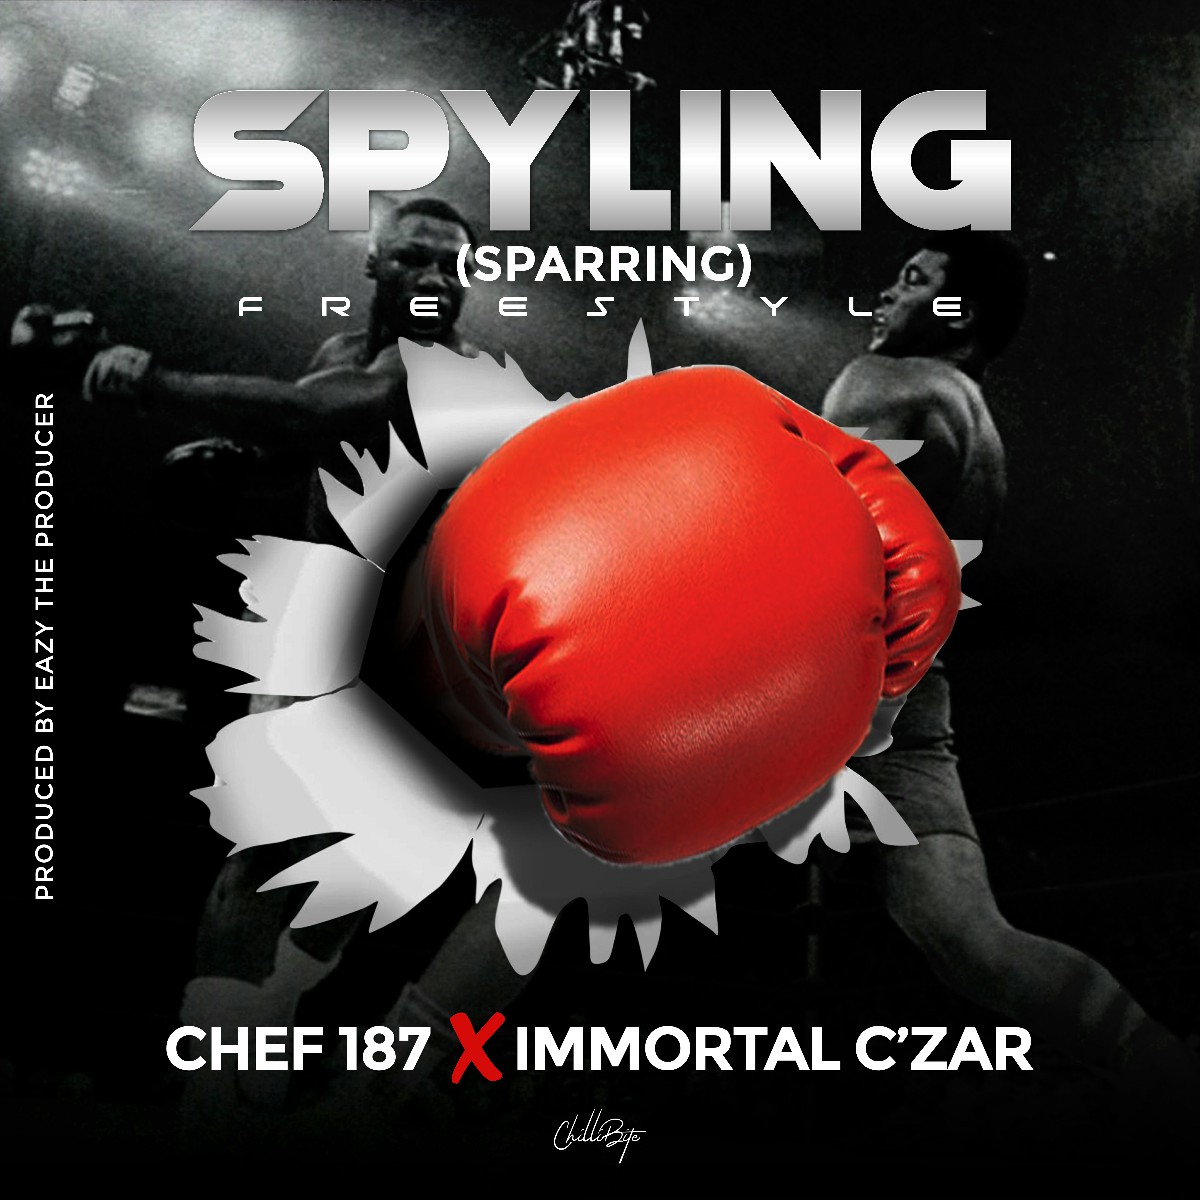 Chef 187 X Immortal Czar - Spyling (Sparring) Freestyle